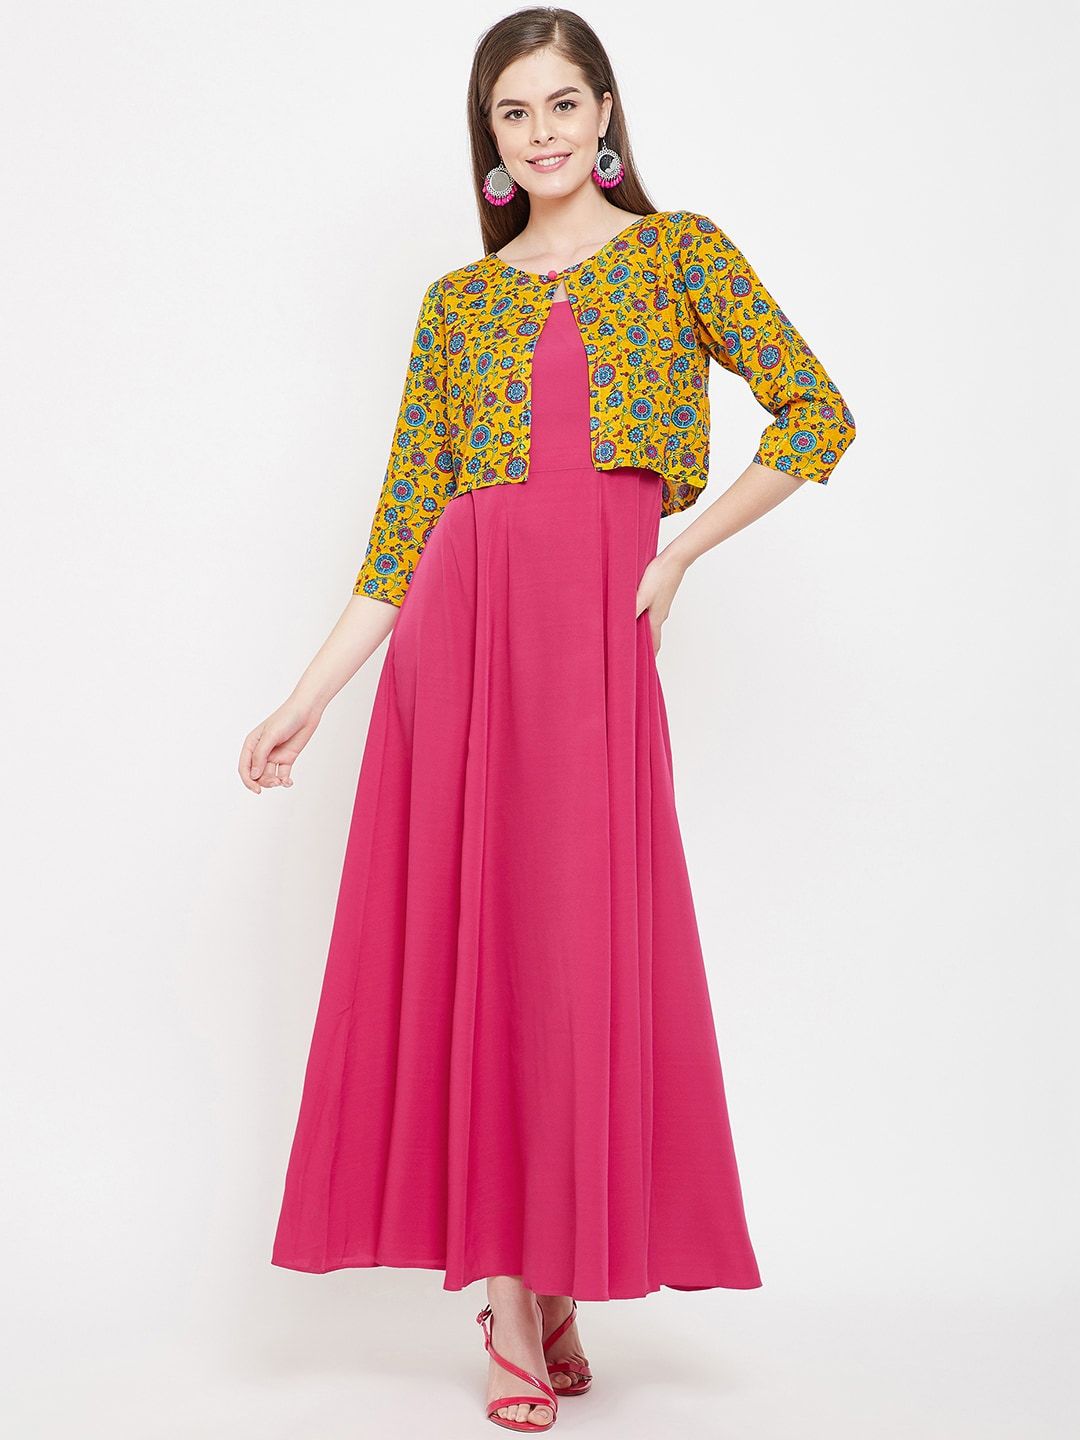 PANIT Yellow & Pink Ethnic A-Line Cotton Maxi Dress With Jacket Price in India